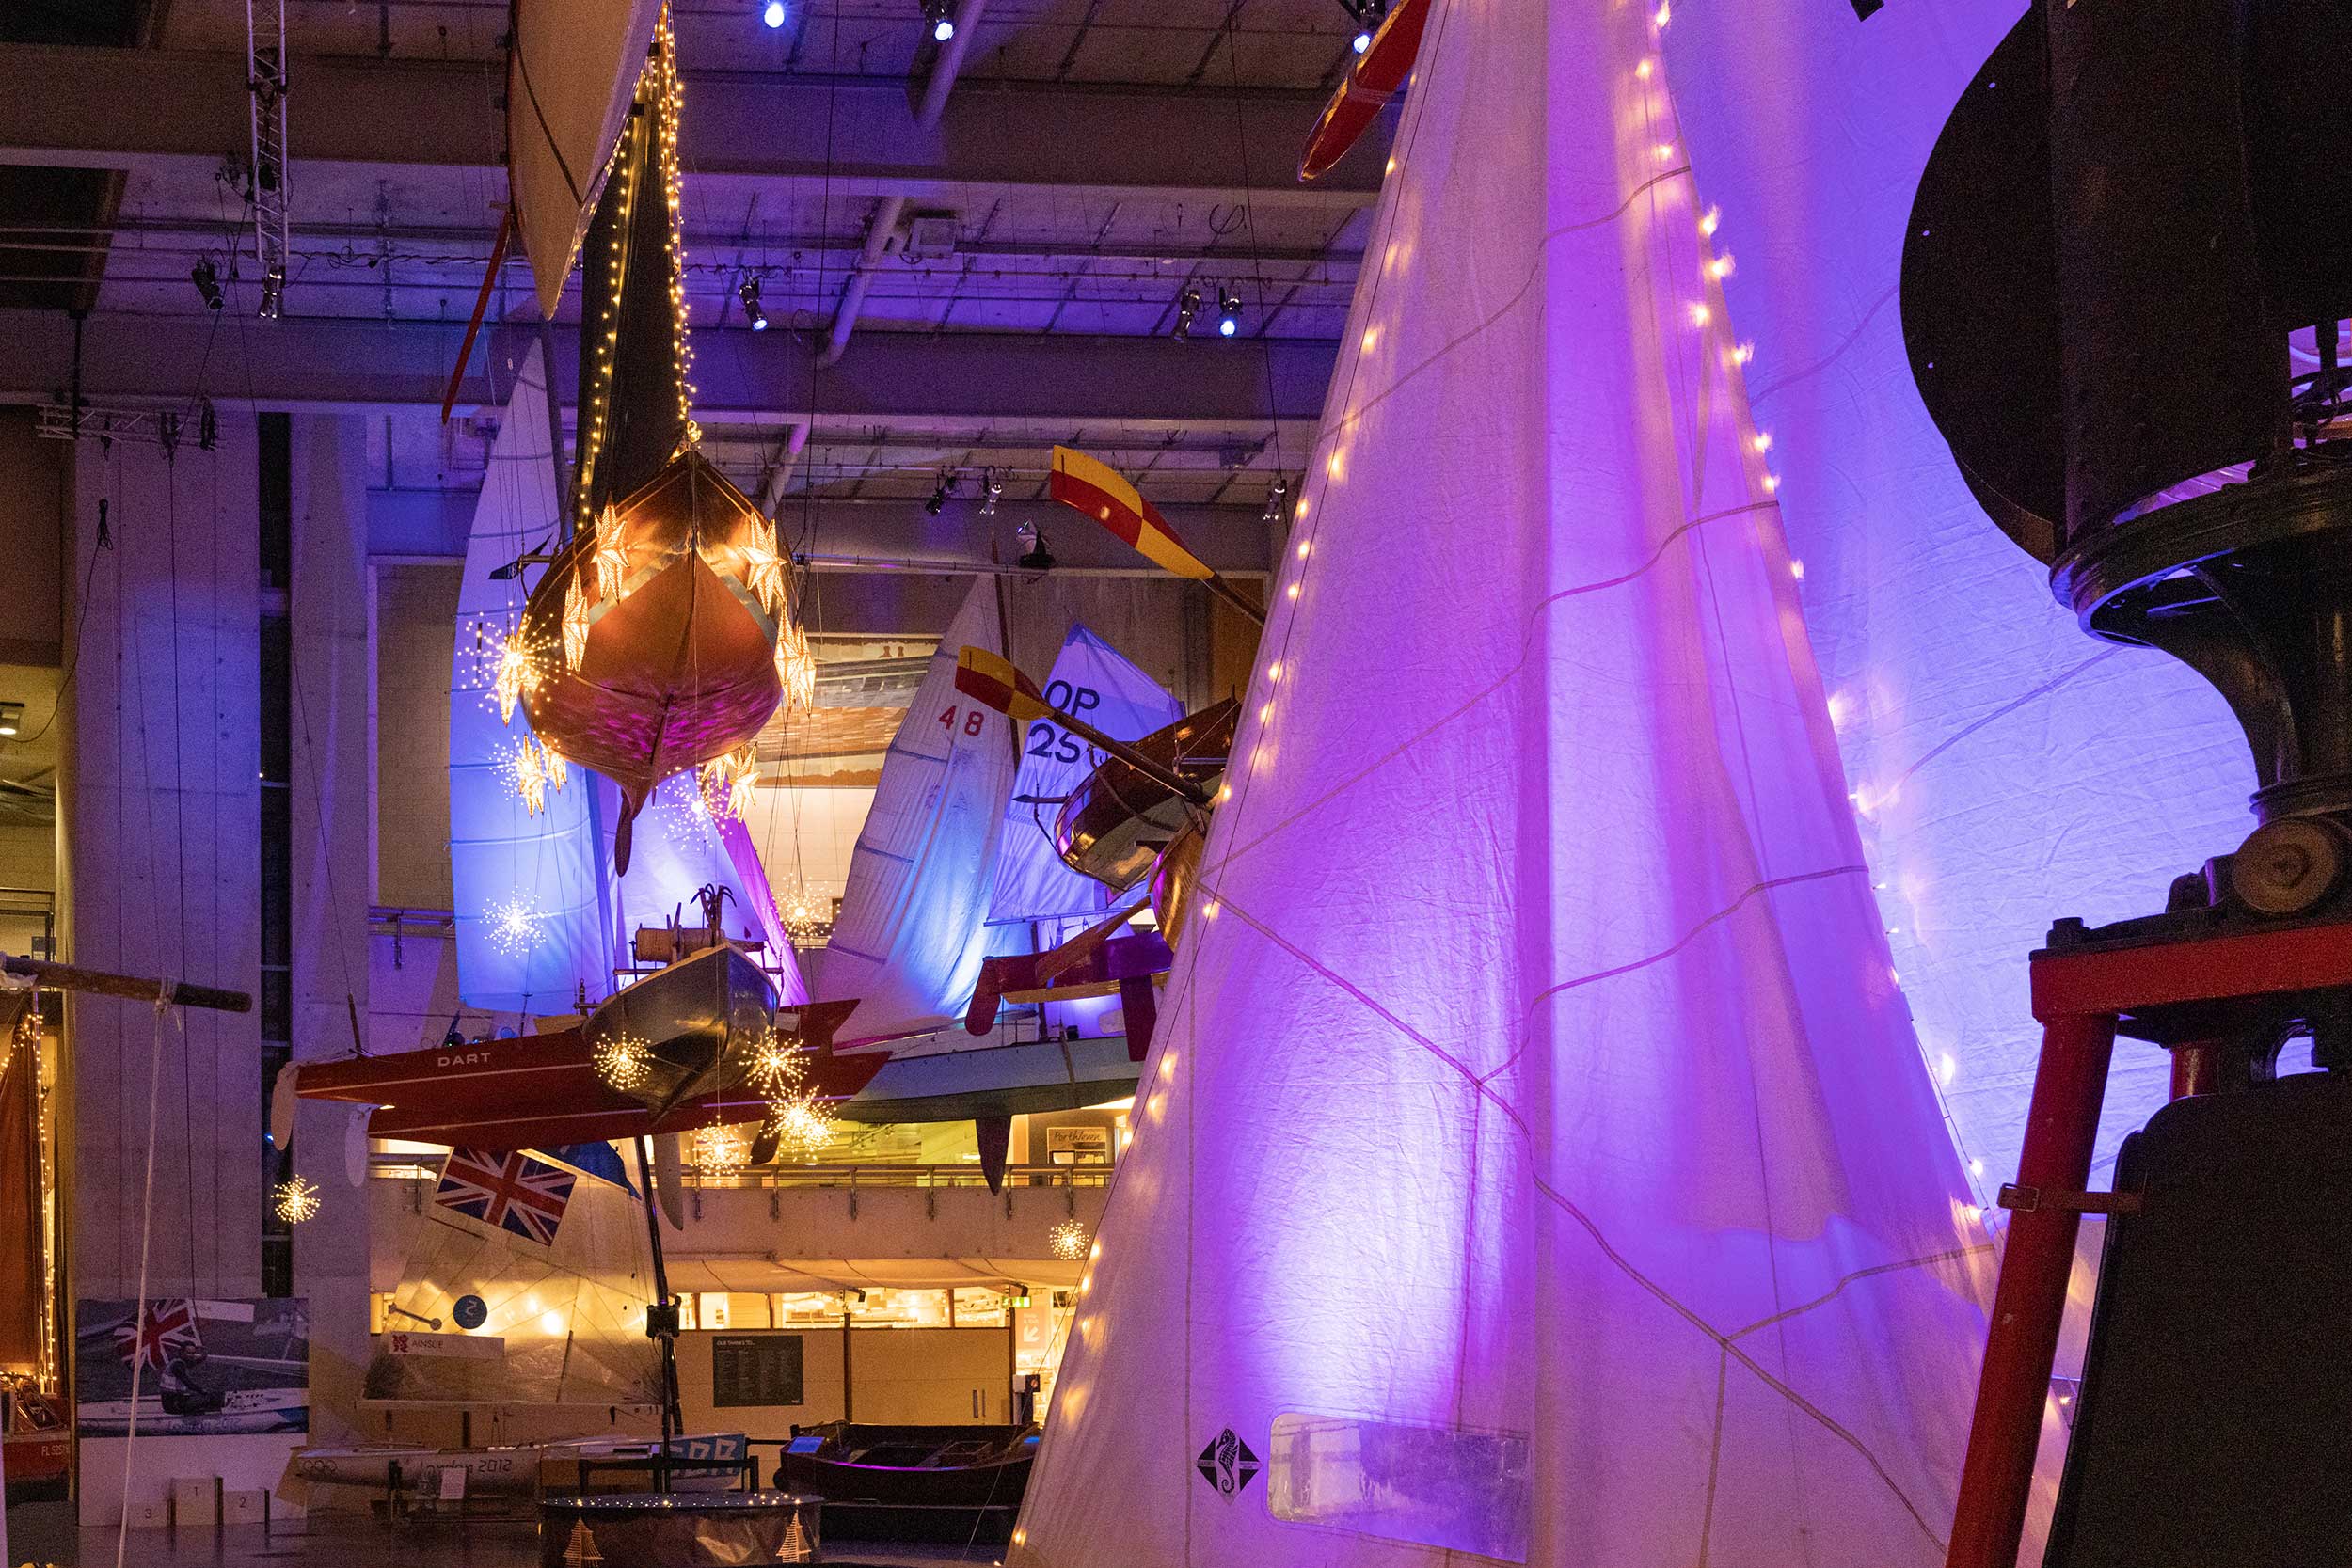 Photo looking up at the boats suspended from the ceiling of the Museum's Boat Hall, draped in warm lights.